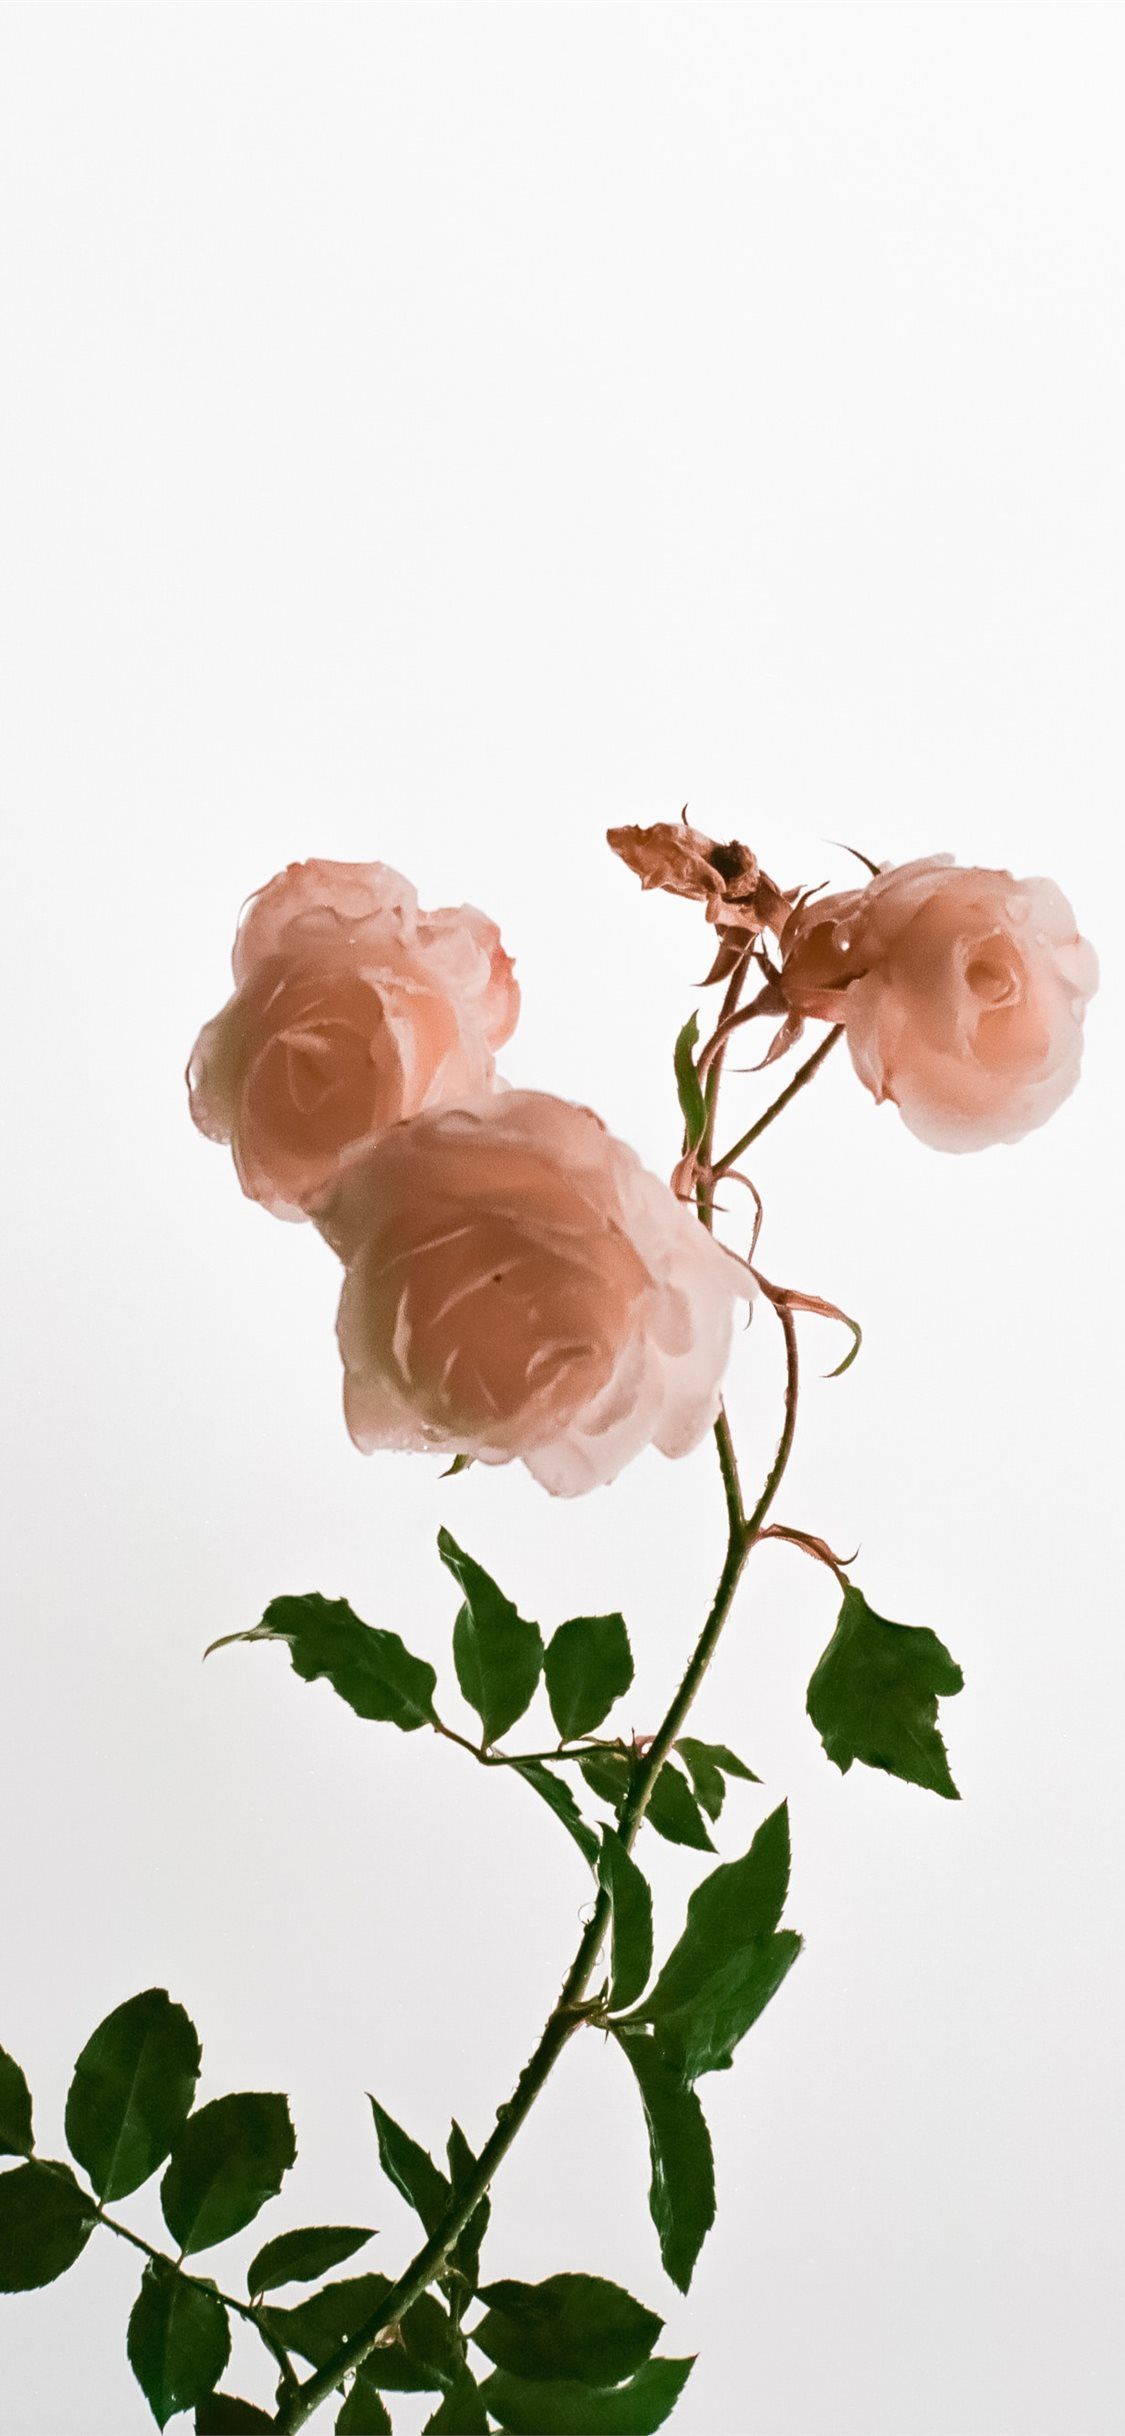 Aggregate more than 159 baby pink rose wallpaper latest